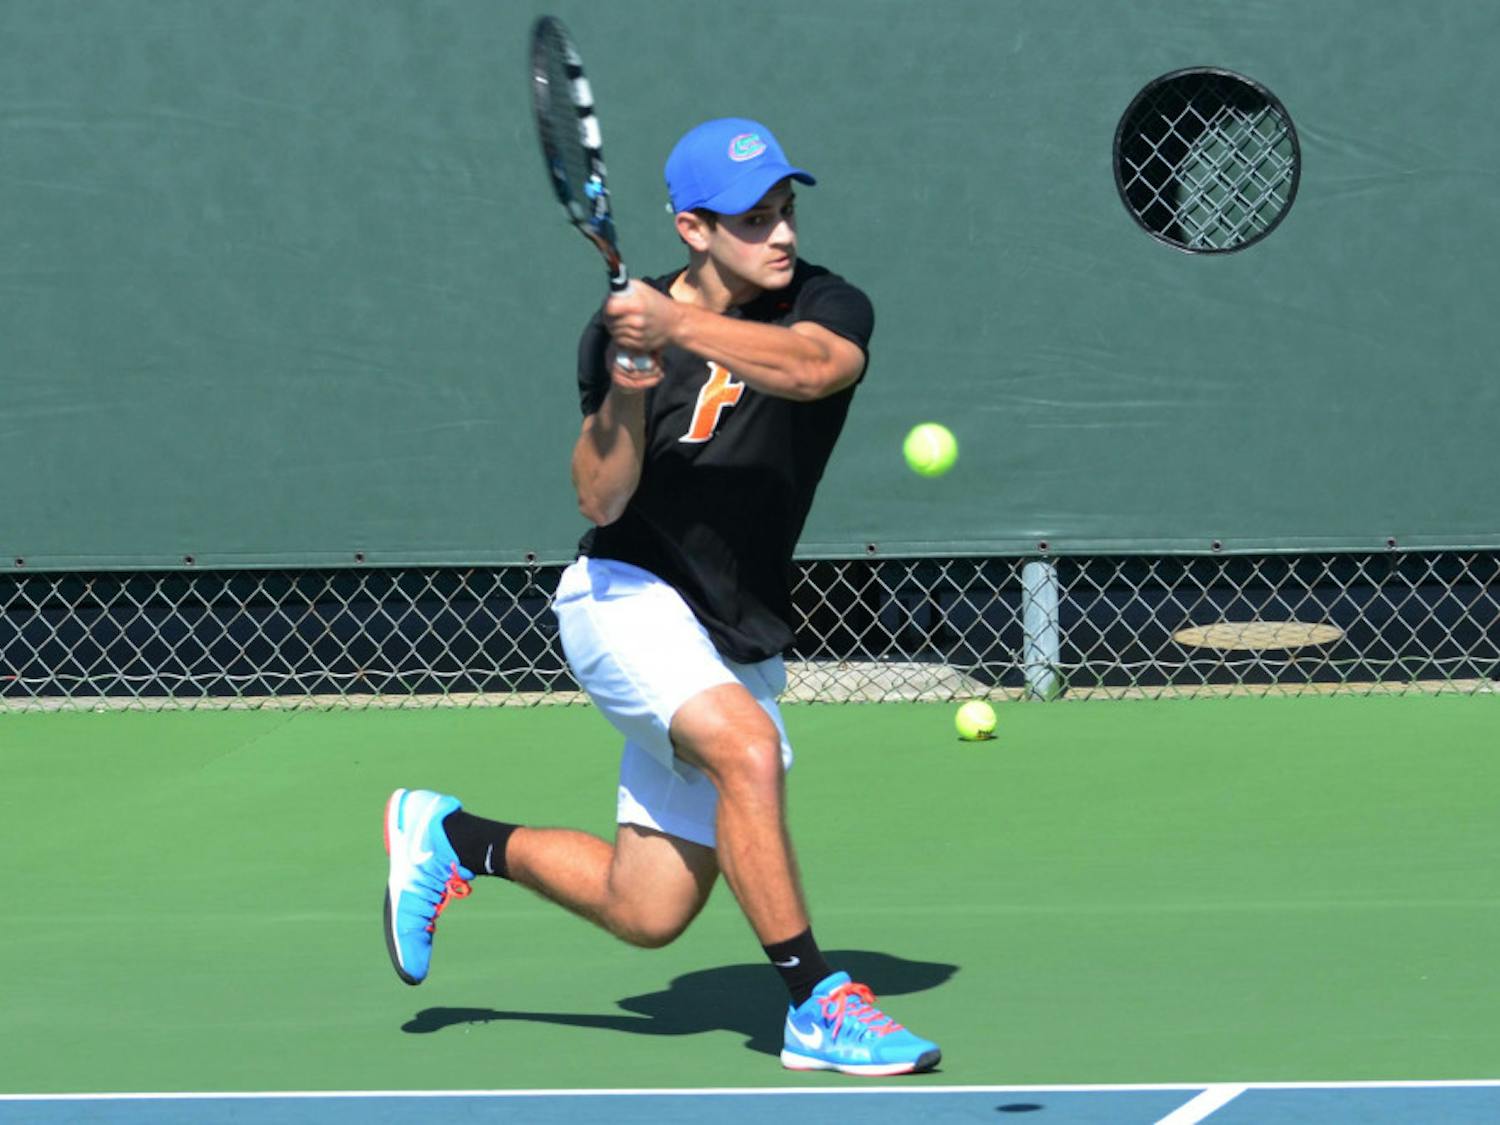 Elliott Orkin returns a ball during Florida's 9-3 win against William &amp; Mary on Saturday at the Ring Tennis Complex.